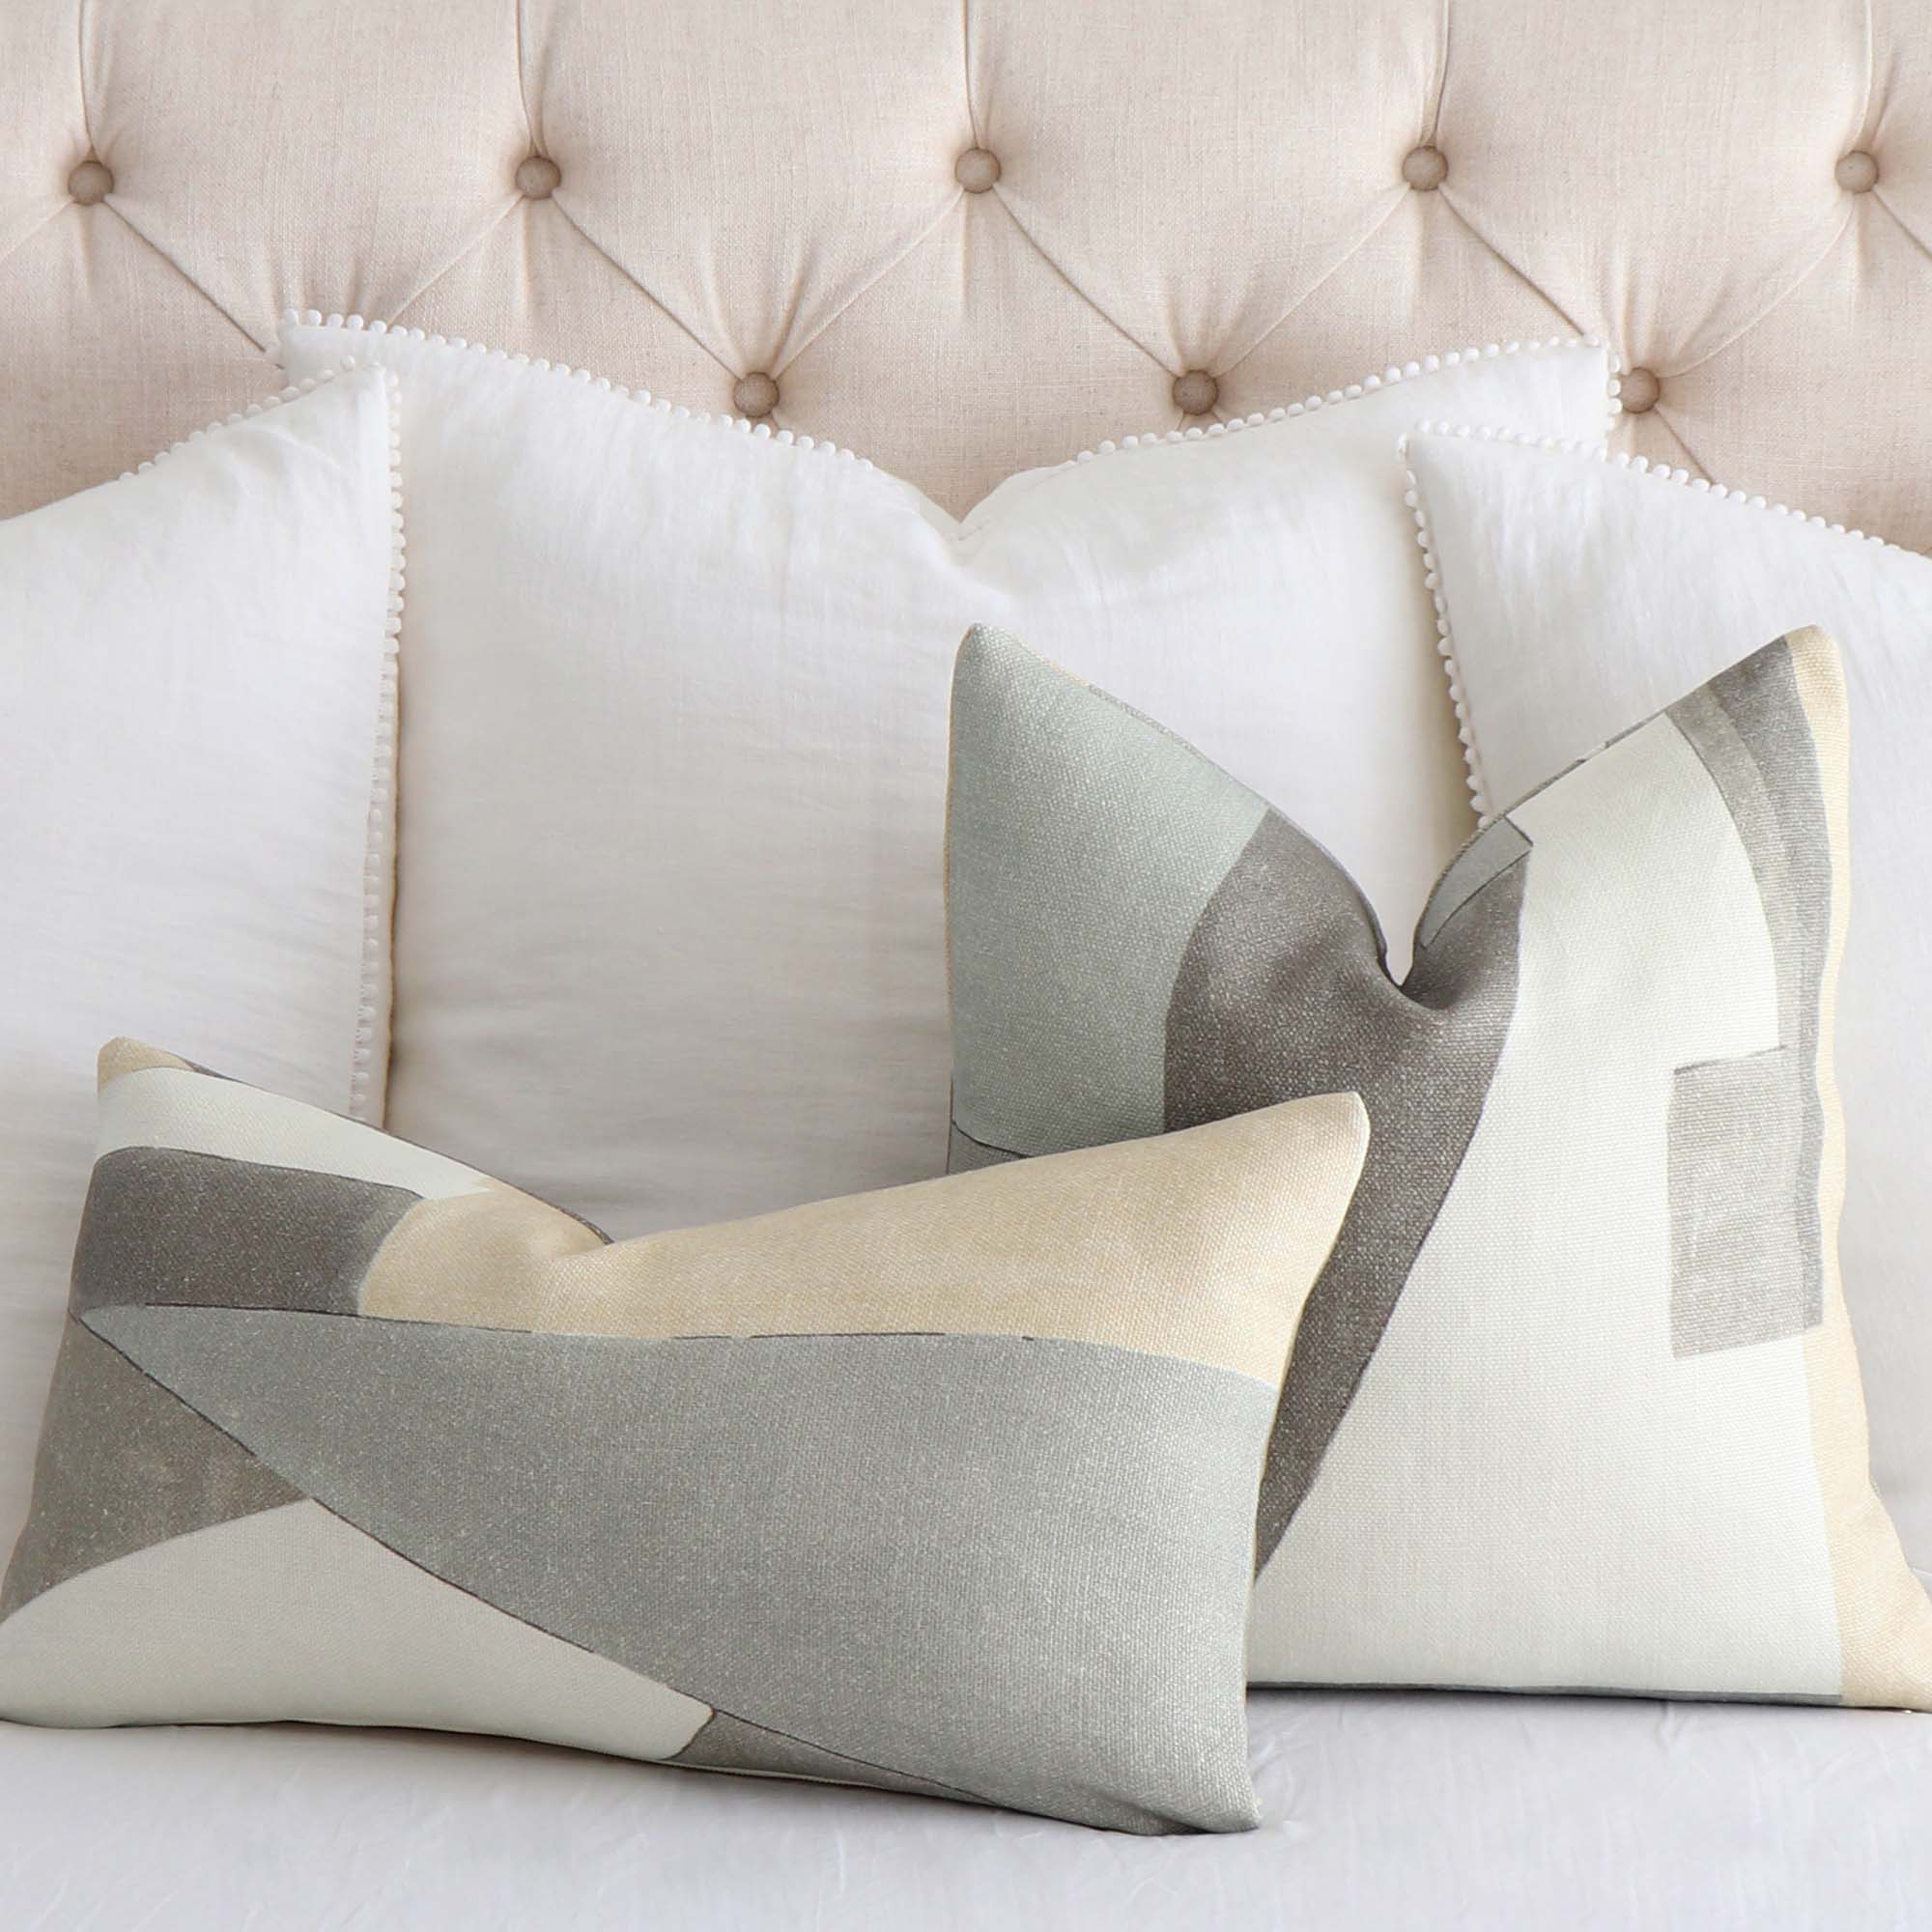 Kelly Wearstler District Alabaster Designer Luxury Decorative Throw Pillow Cover with White Large Euro Linen Shams